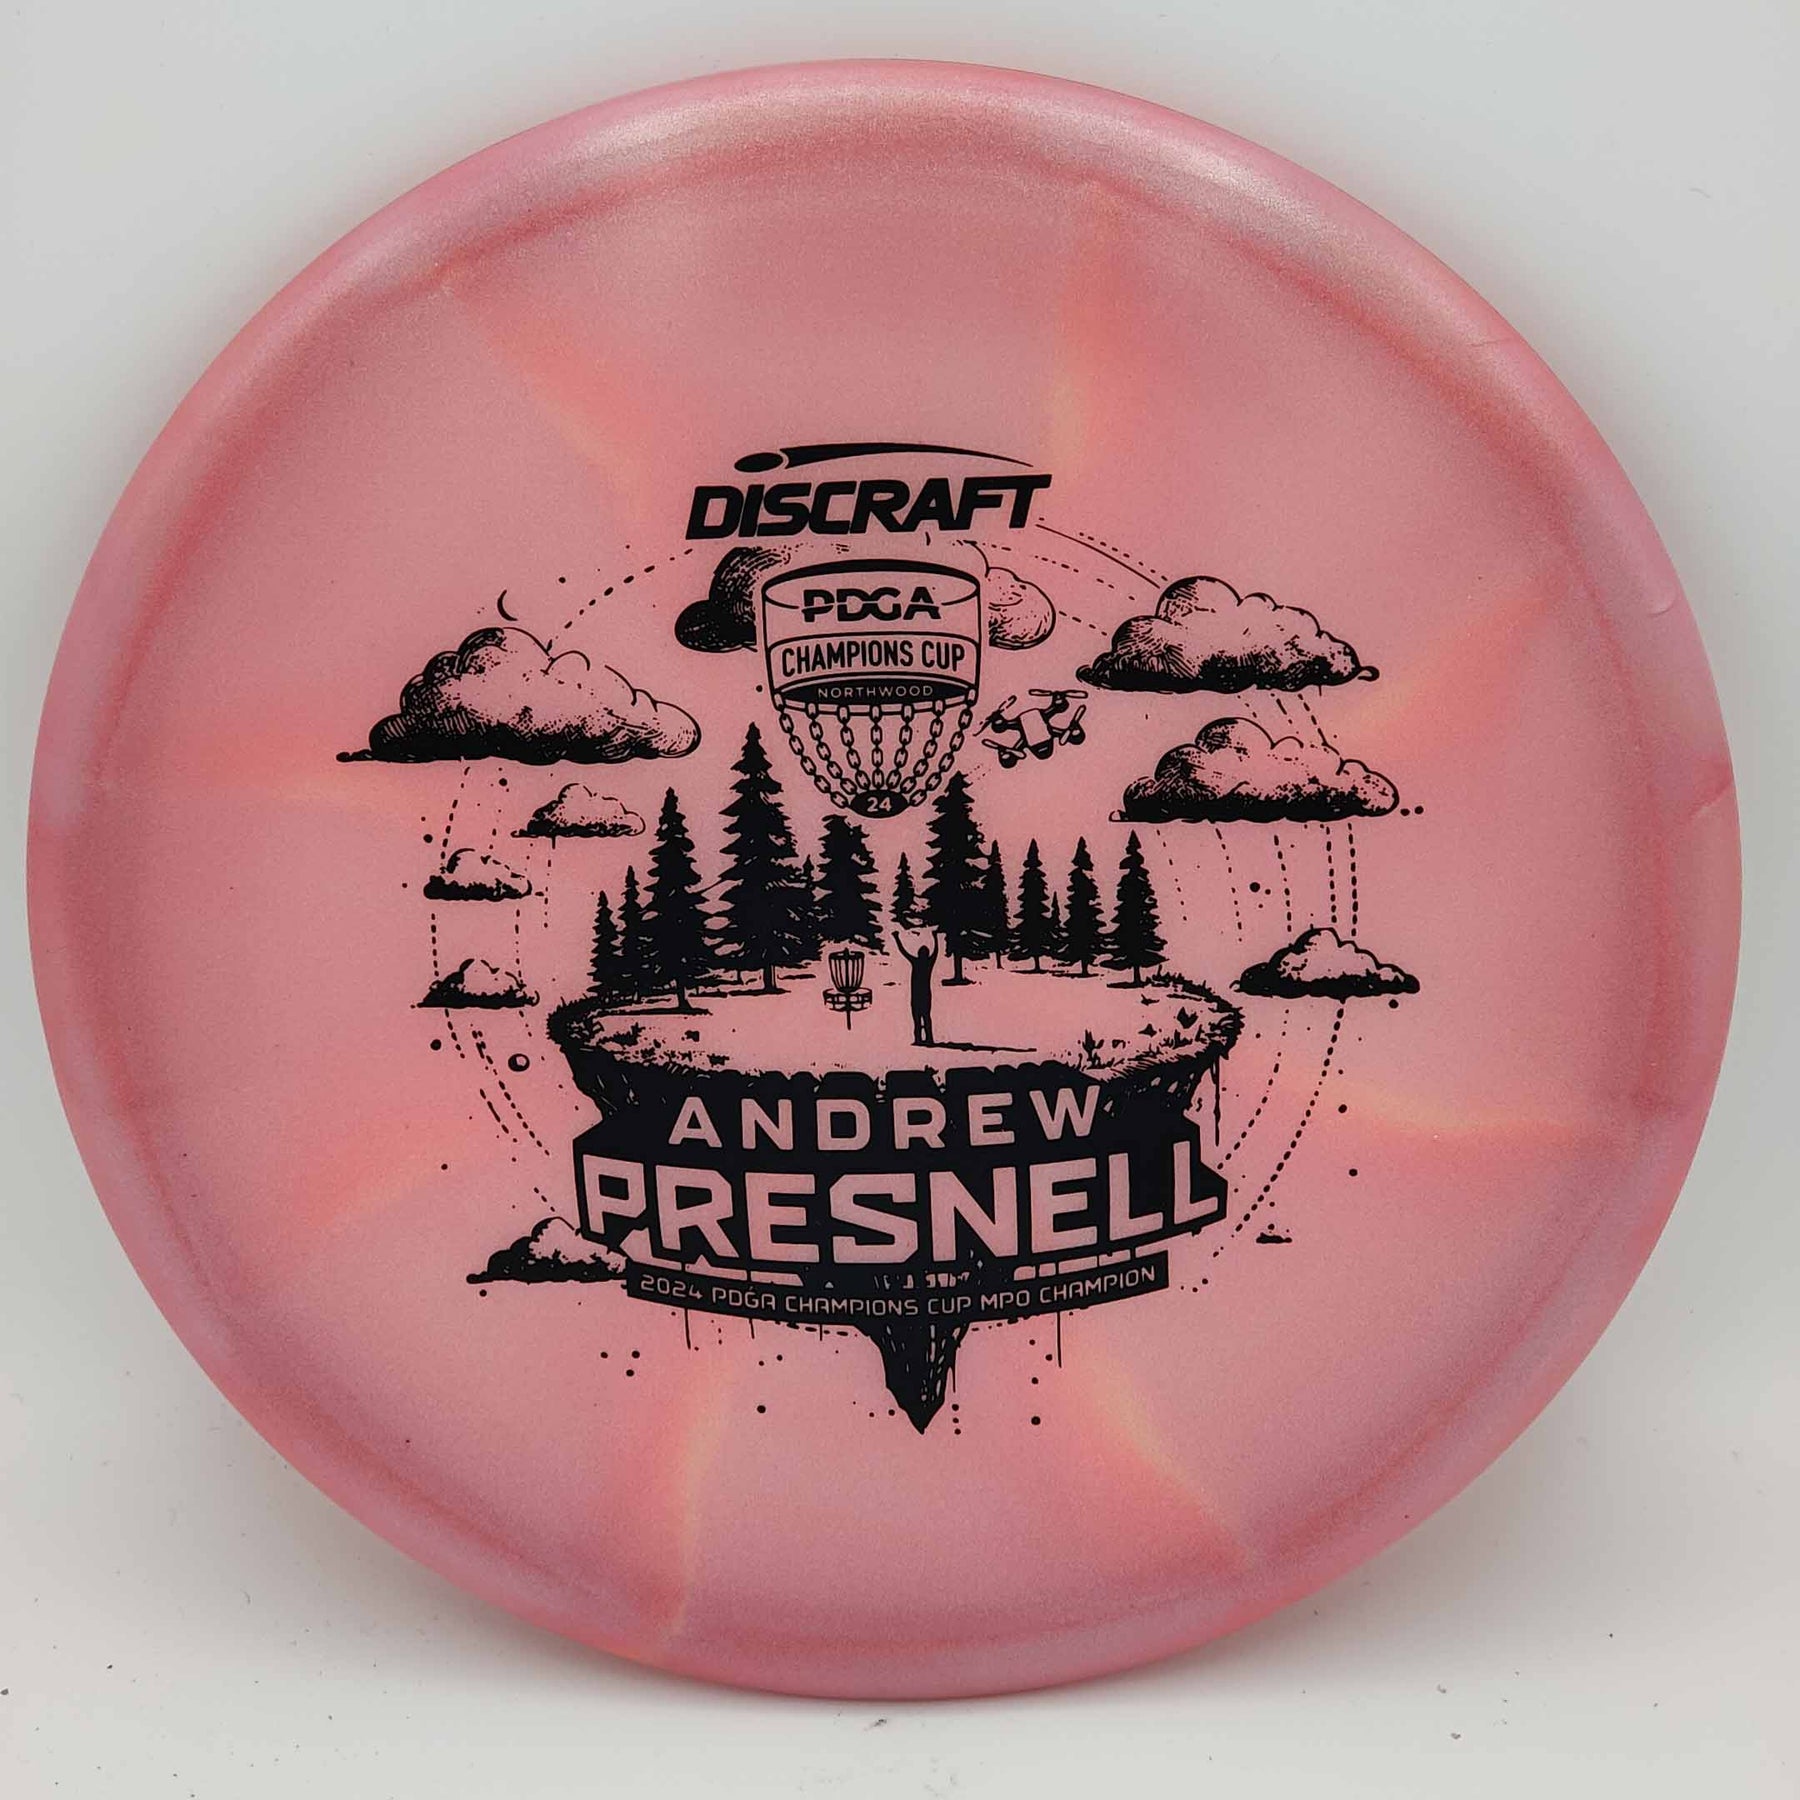 Discraft Drone - Andrew Presnell Champion's Cup 173-177+g